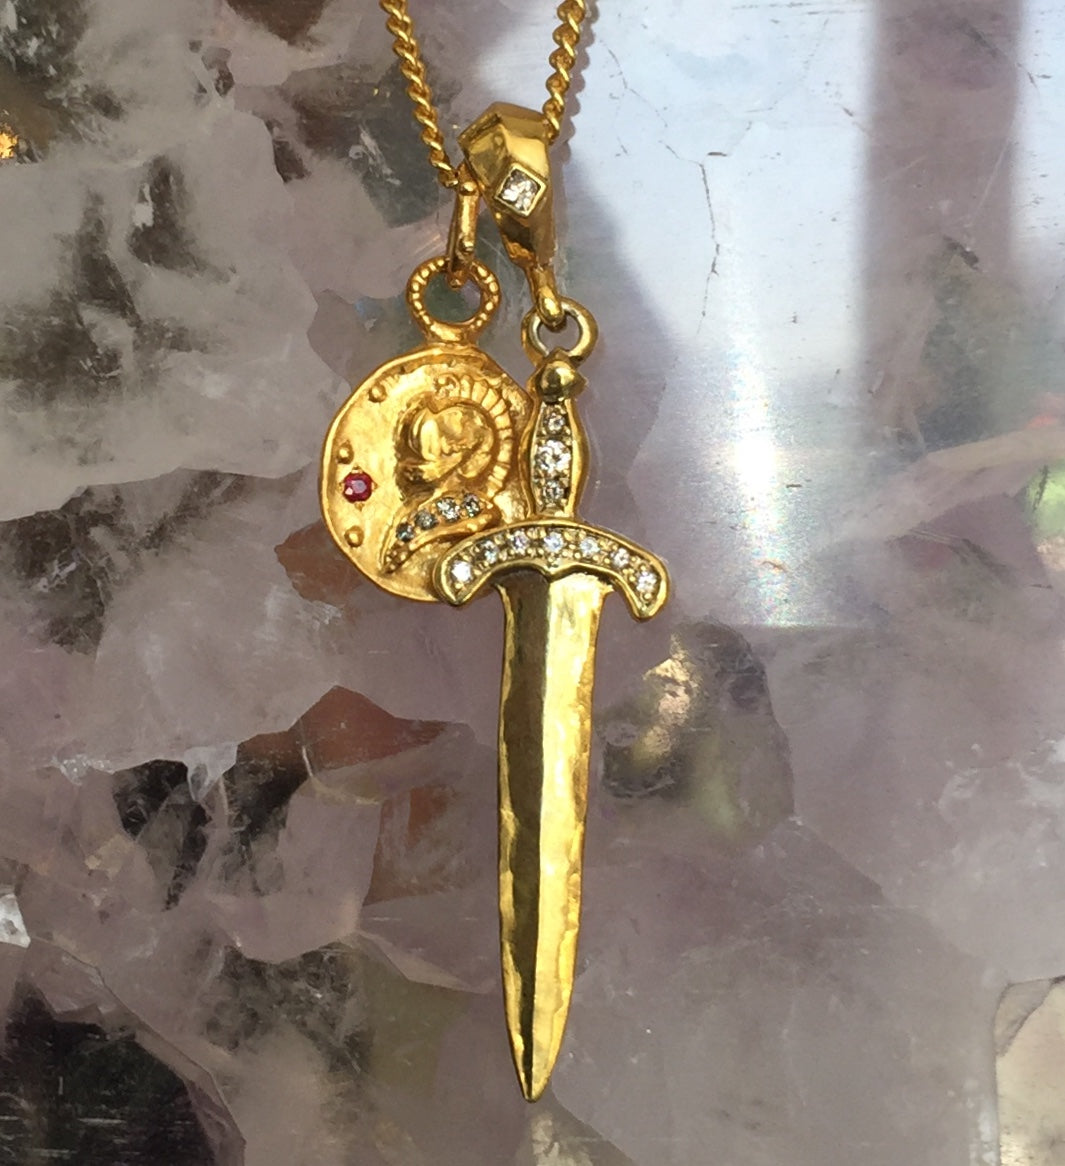 Necklace - Sword with Knight Medallion